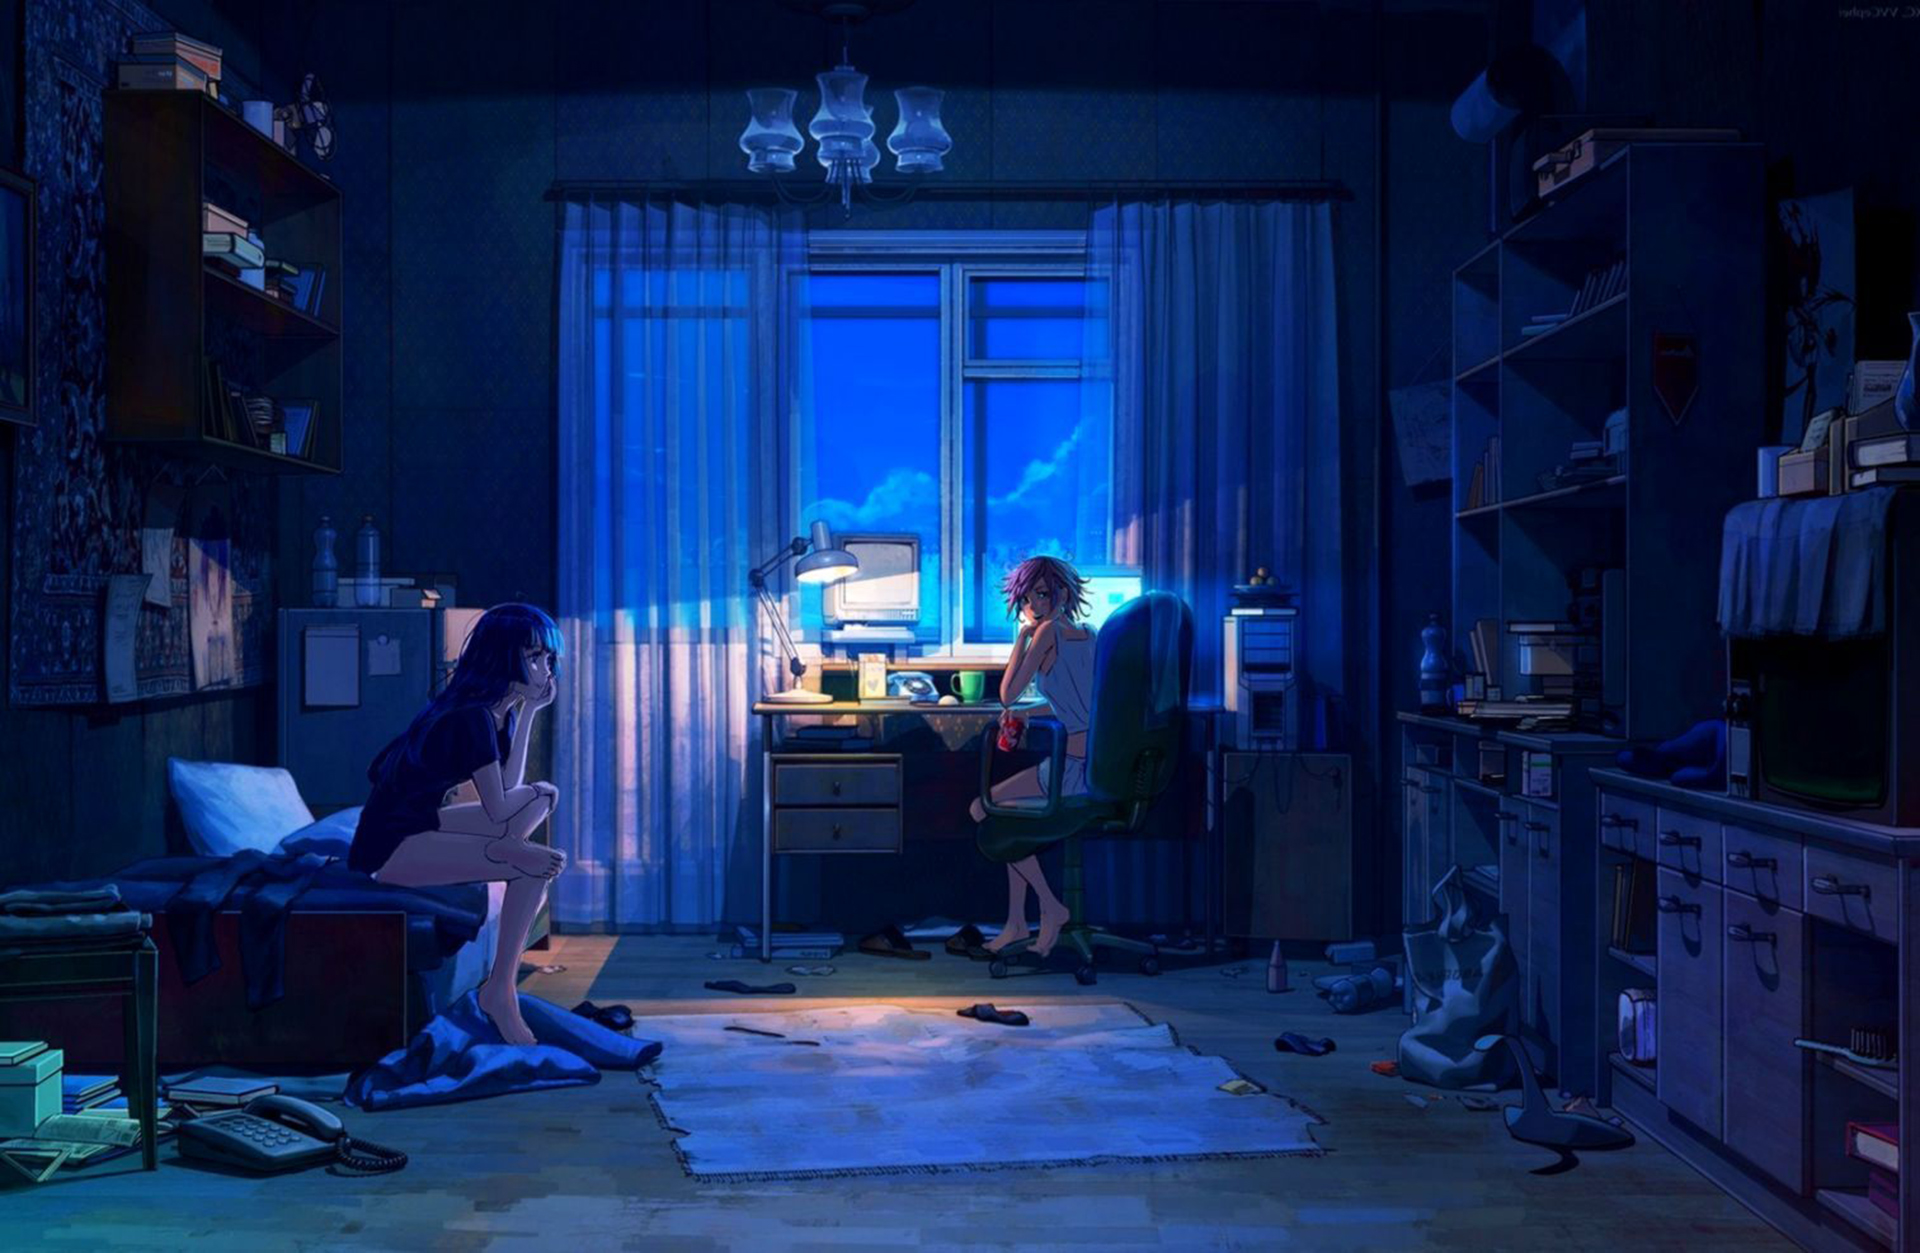 Anime Landscape Student Bedroom at Night Anime Background